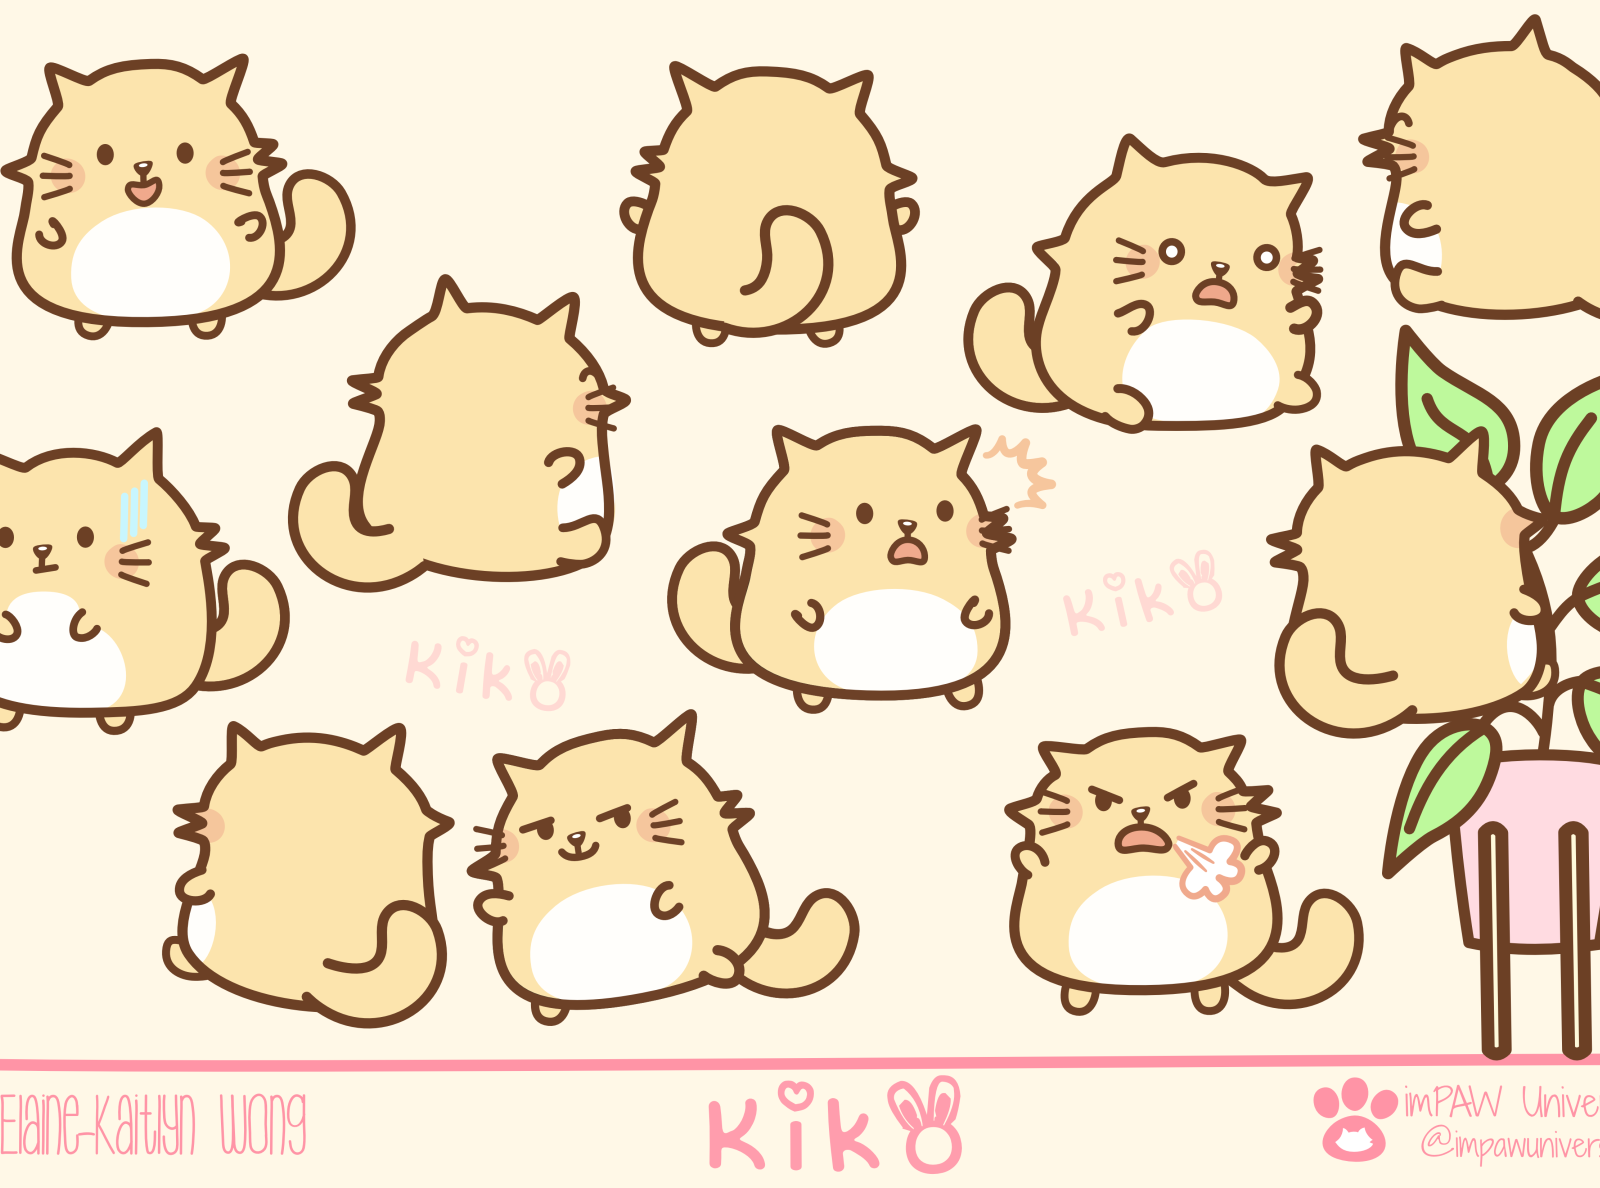 Kiko character expressions designs by I M PAW Universe- Pop | Contemporary  | Cartoon | Media Art on Dribbble